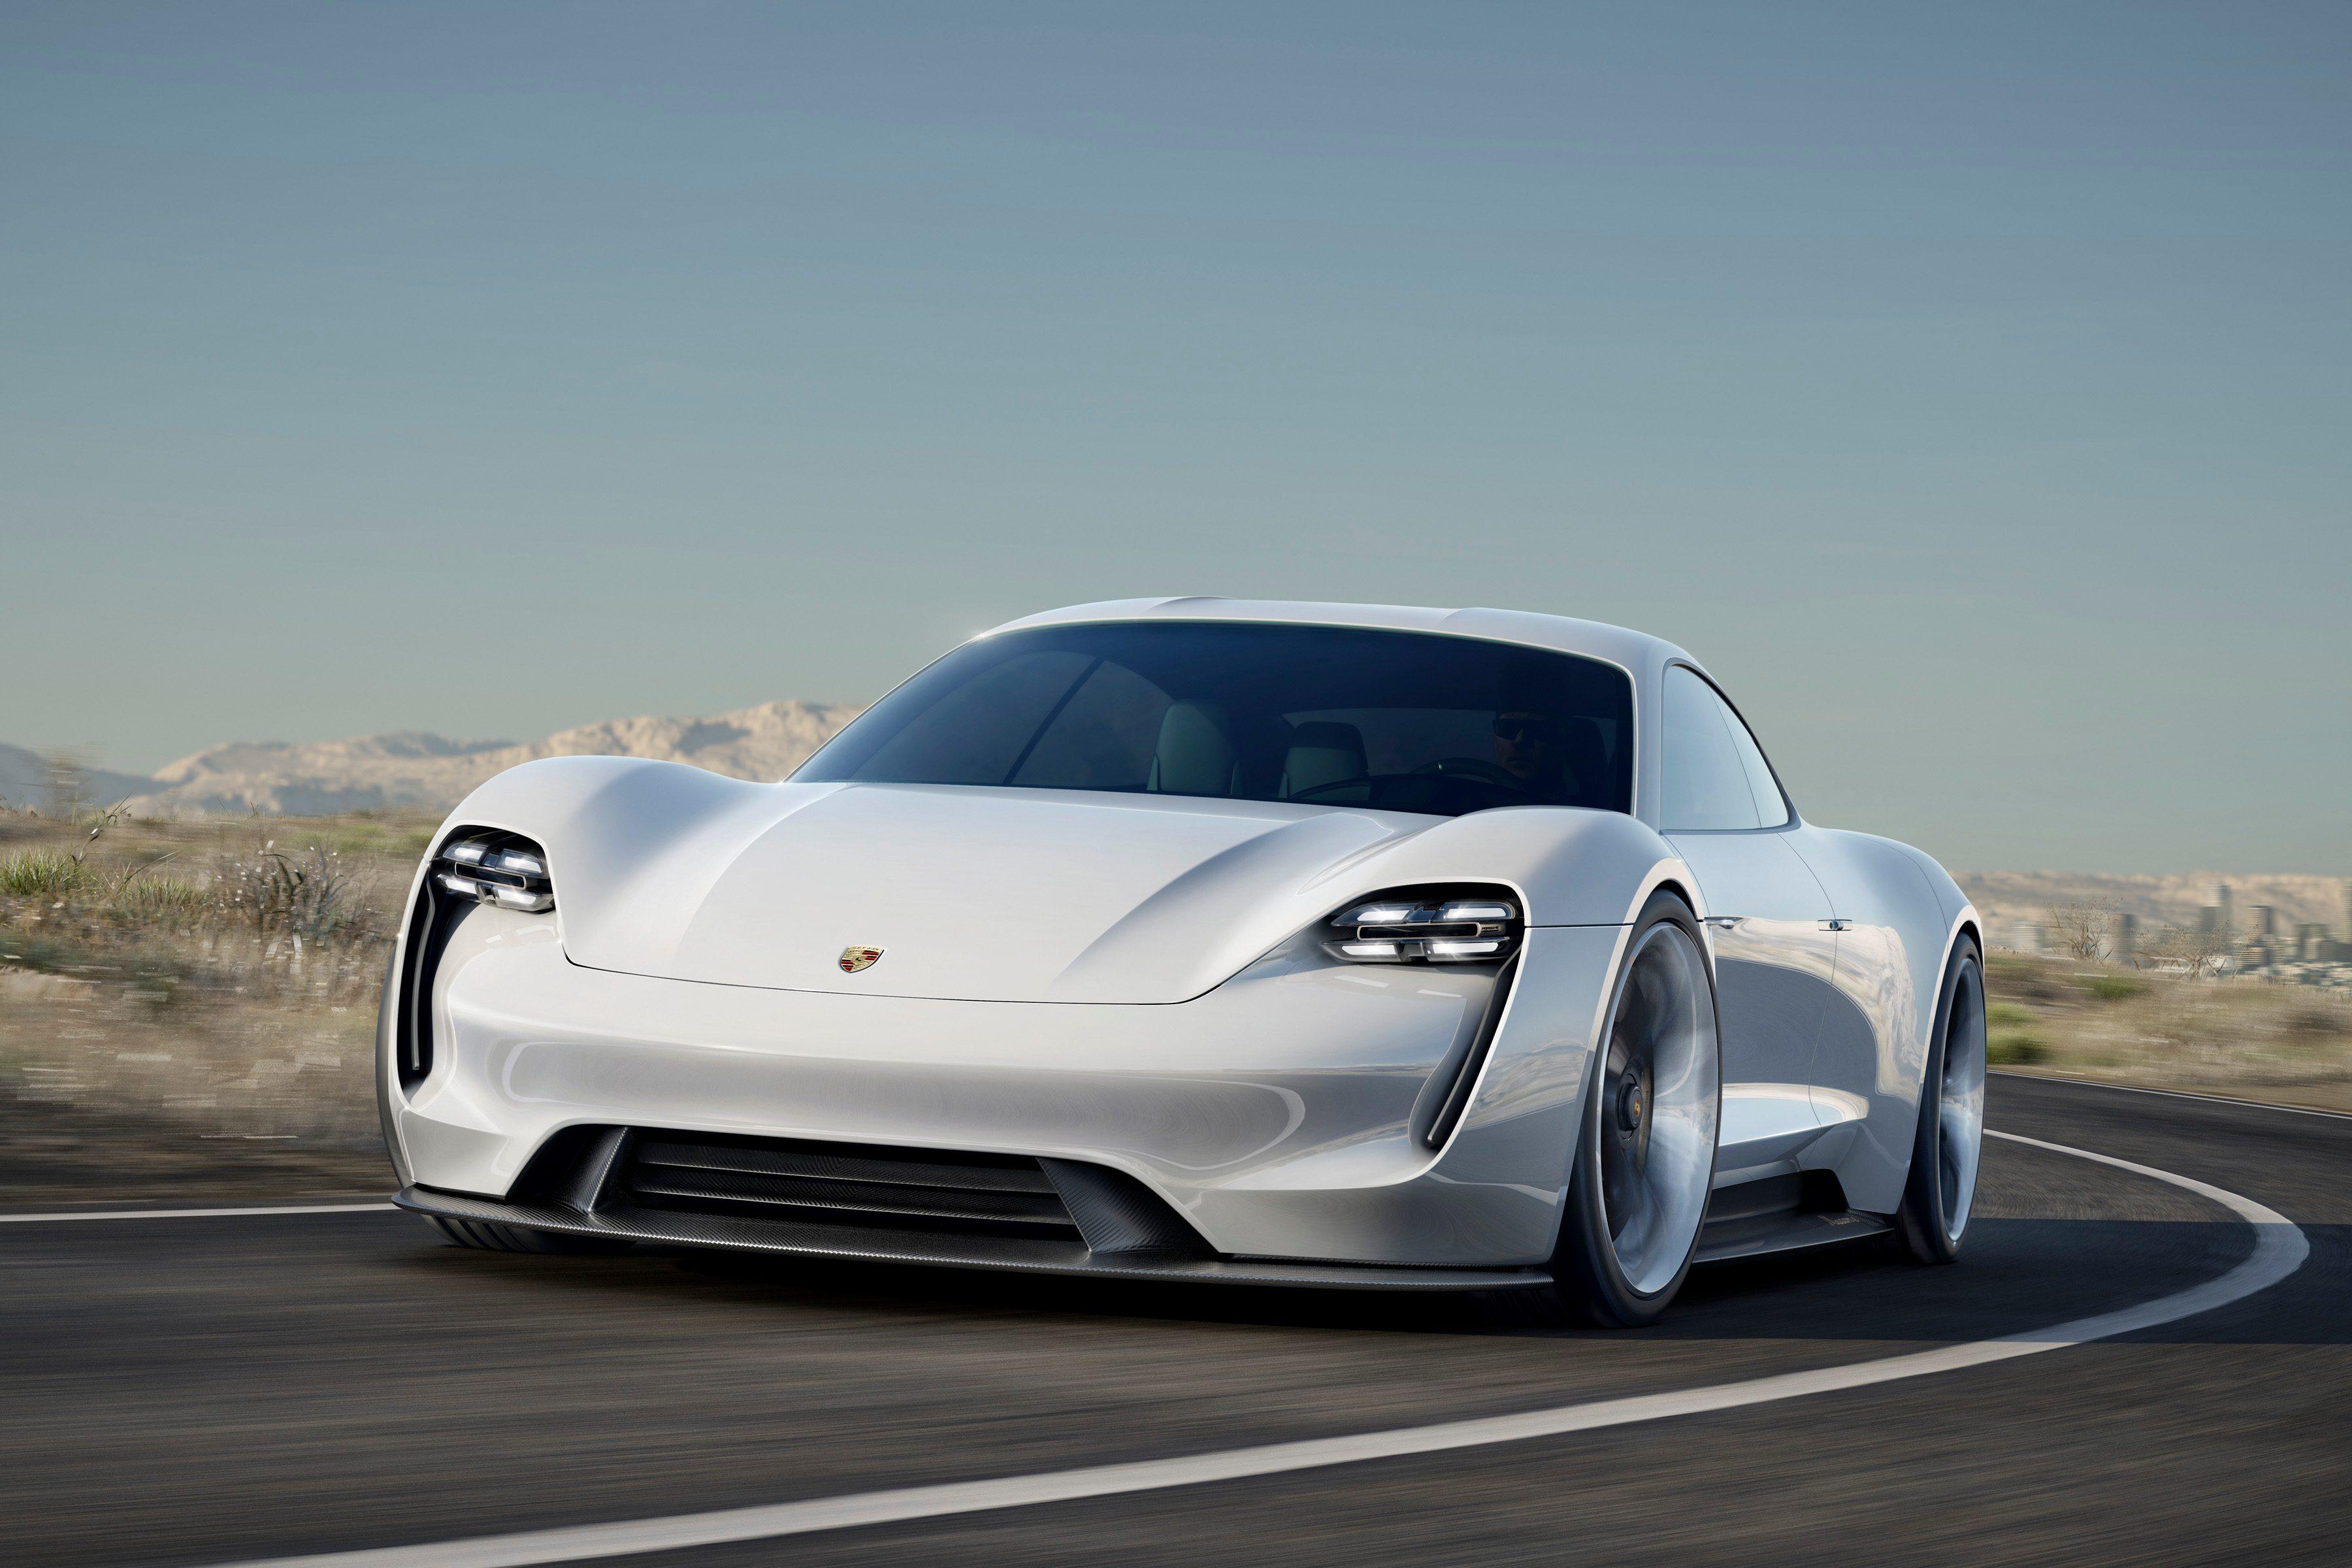 Porsche releases first teaser image of new Taycan Mission E